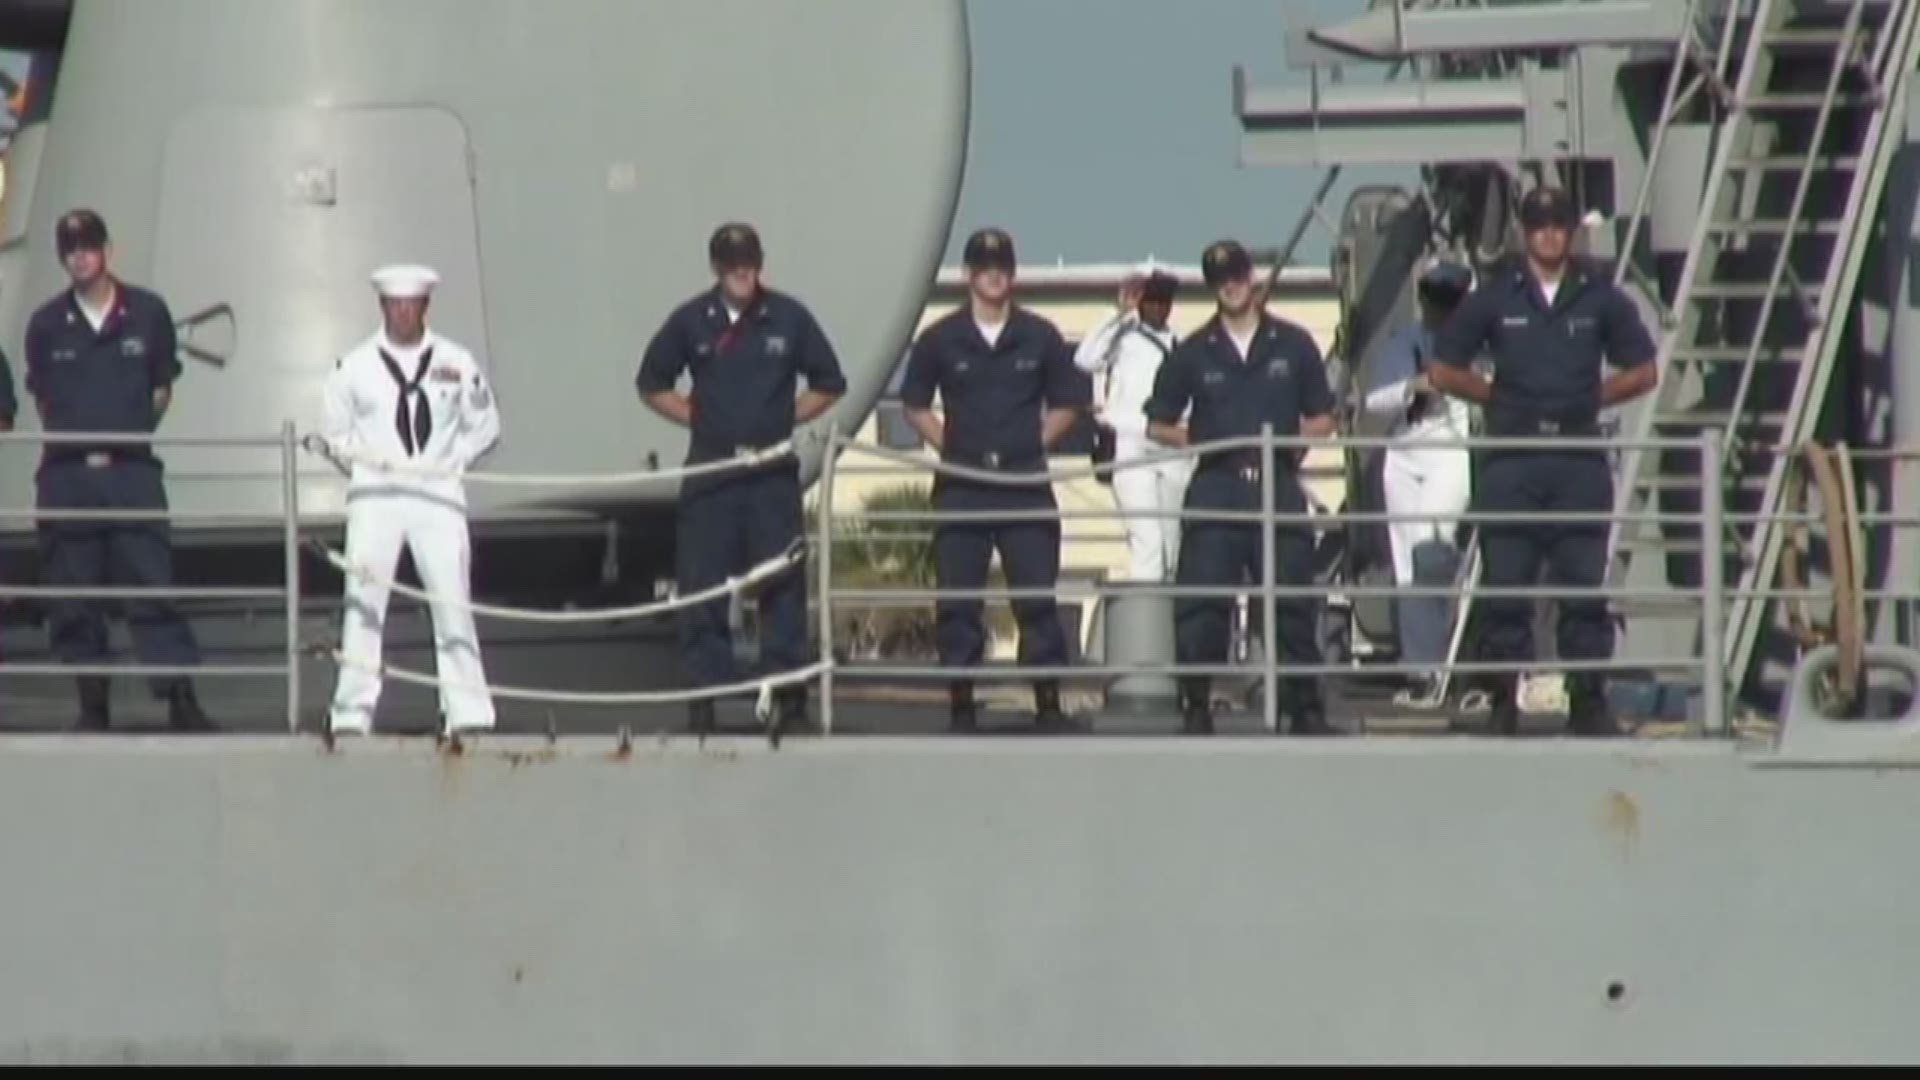 Seven chiefs disciplined on Mayport-based ship after adultery allegations